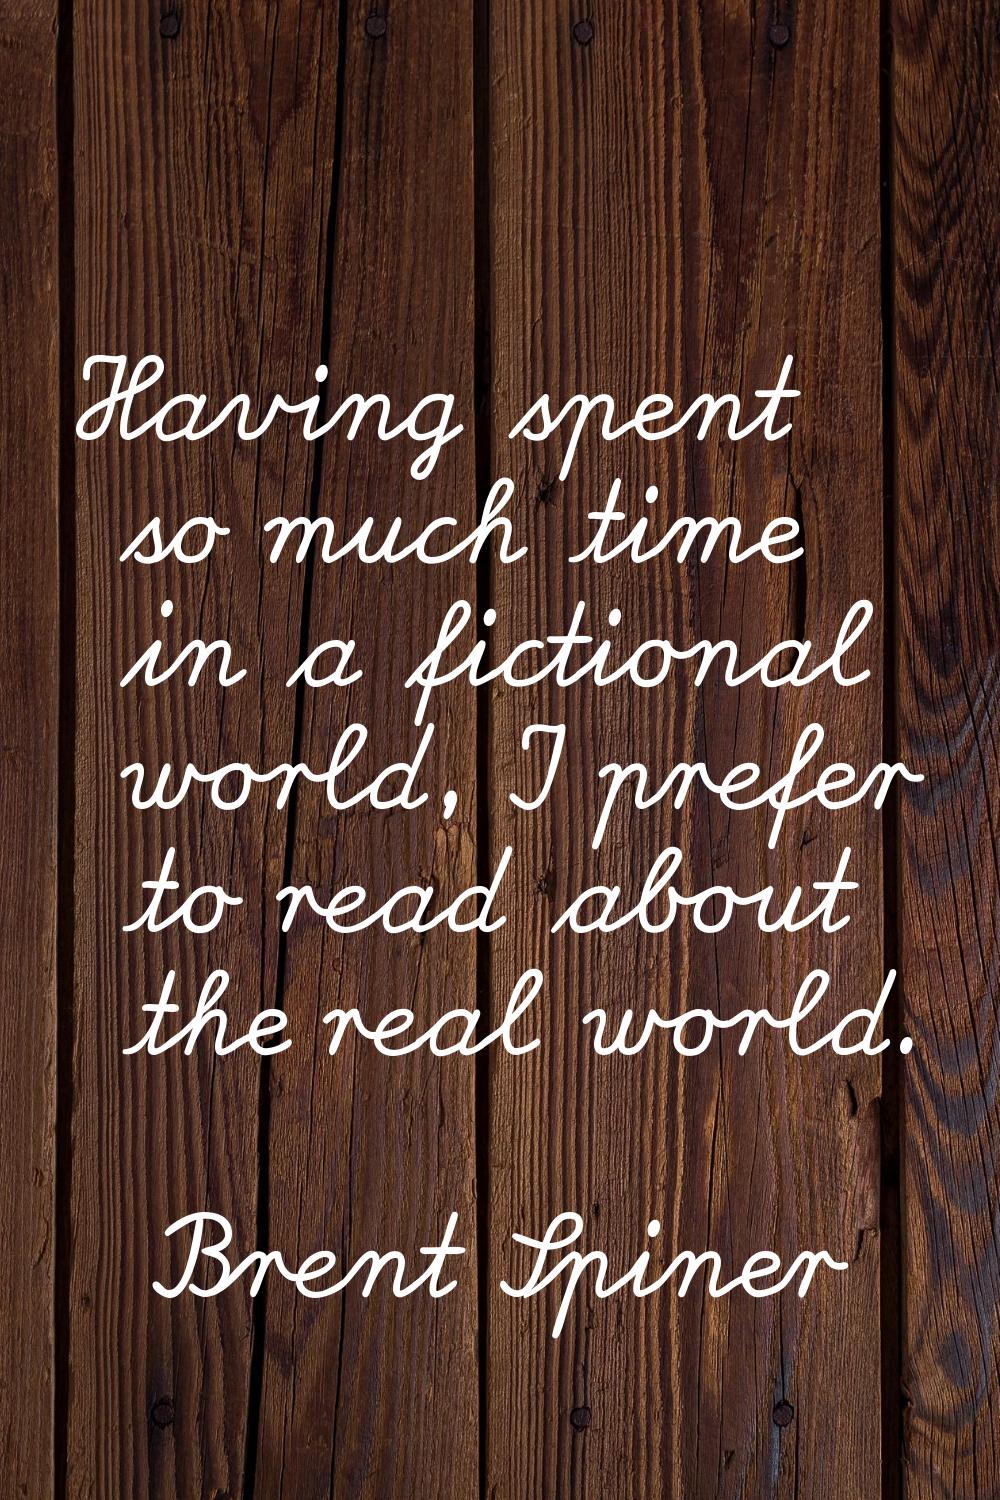 Having spent so much time in a fictional world, I prefer to read about the real world.